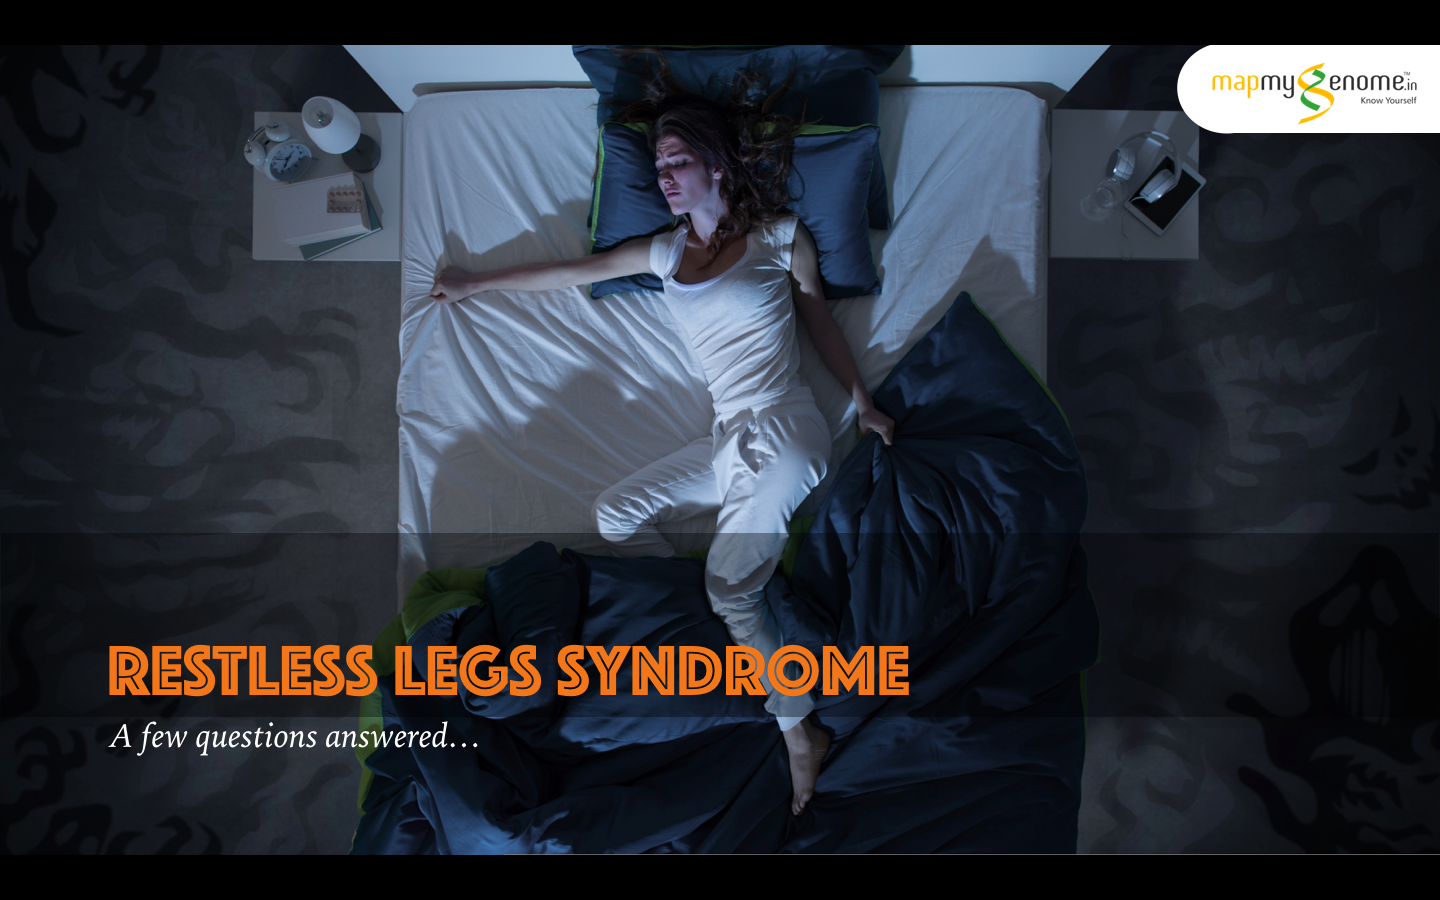 Restless Legs Syndrome: A Restless Experience